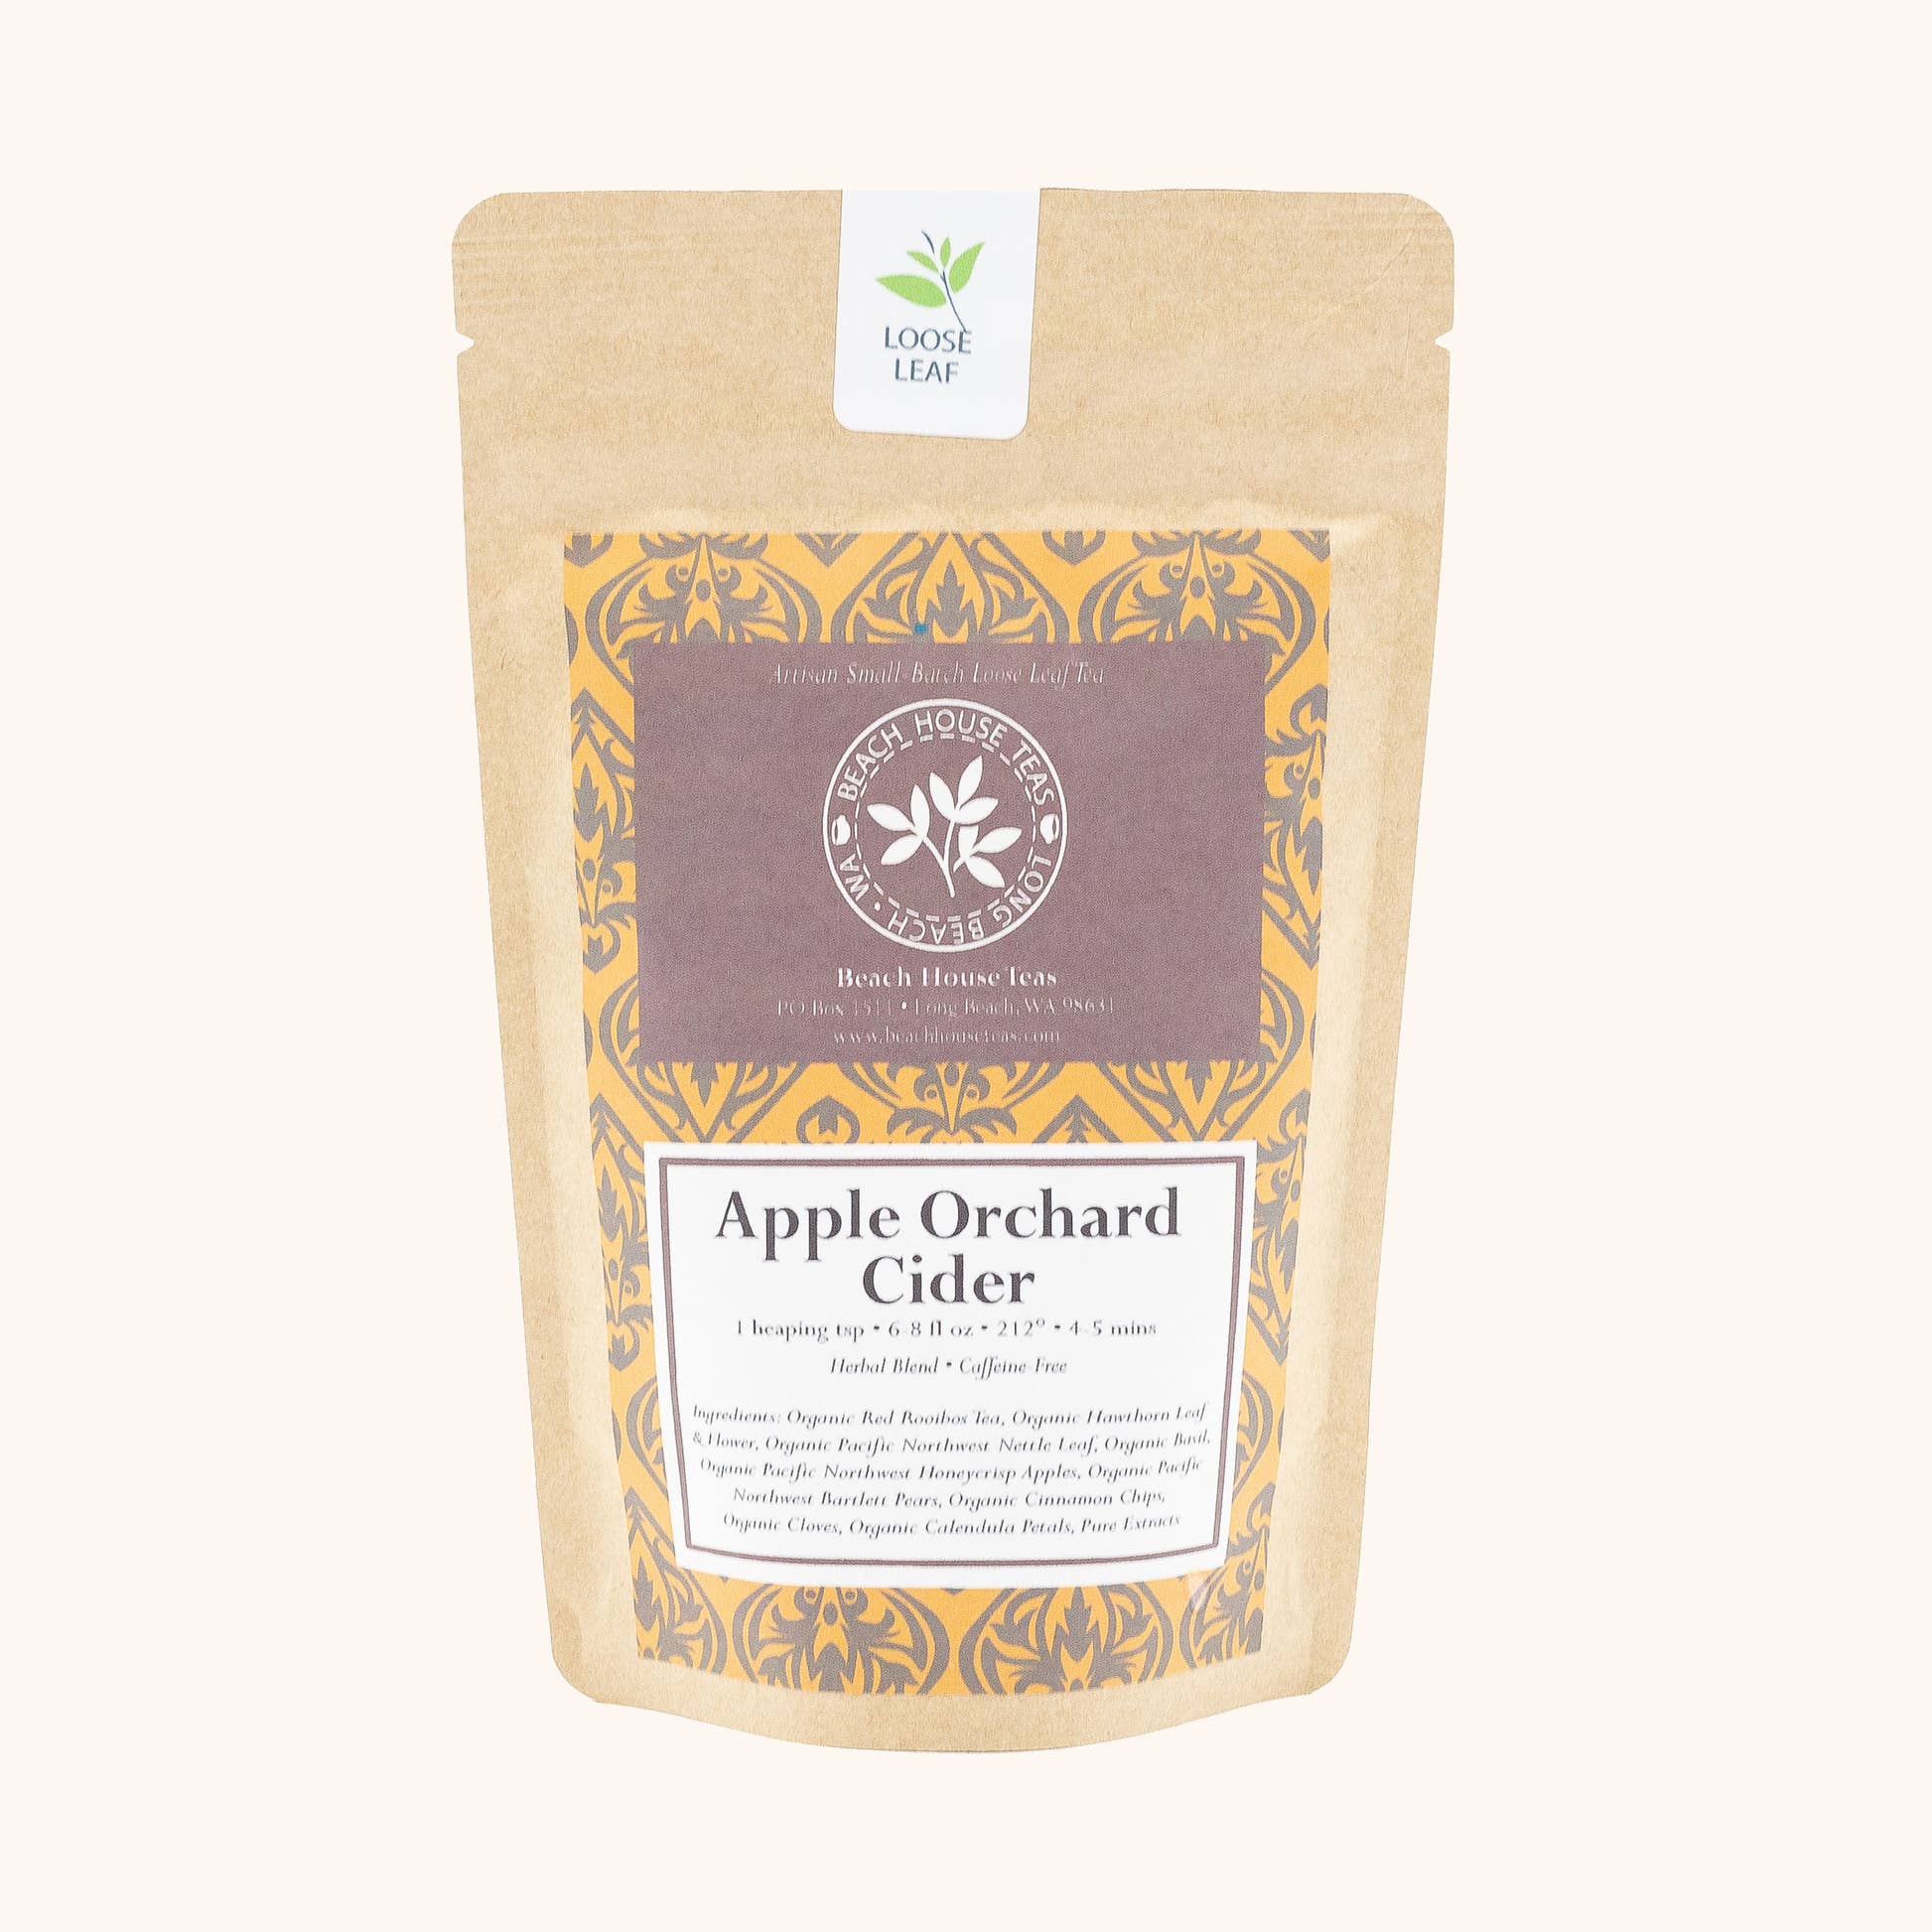 Apple Orchard Cider herbal blend loose leaf tea pouch by Beach House Teas